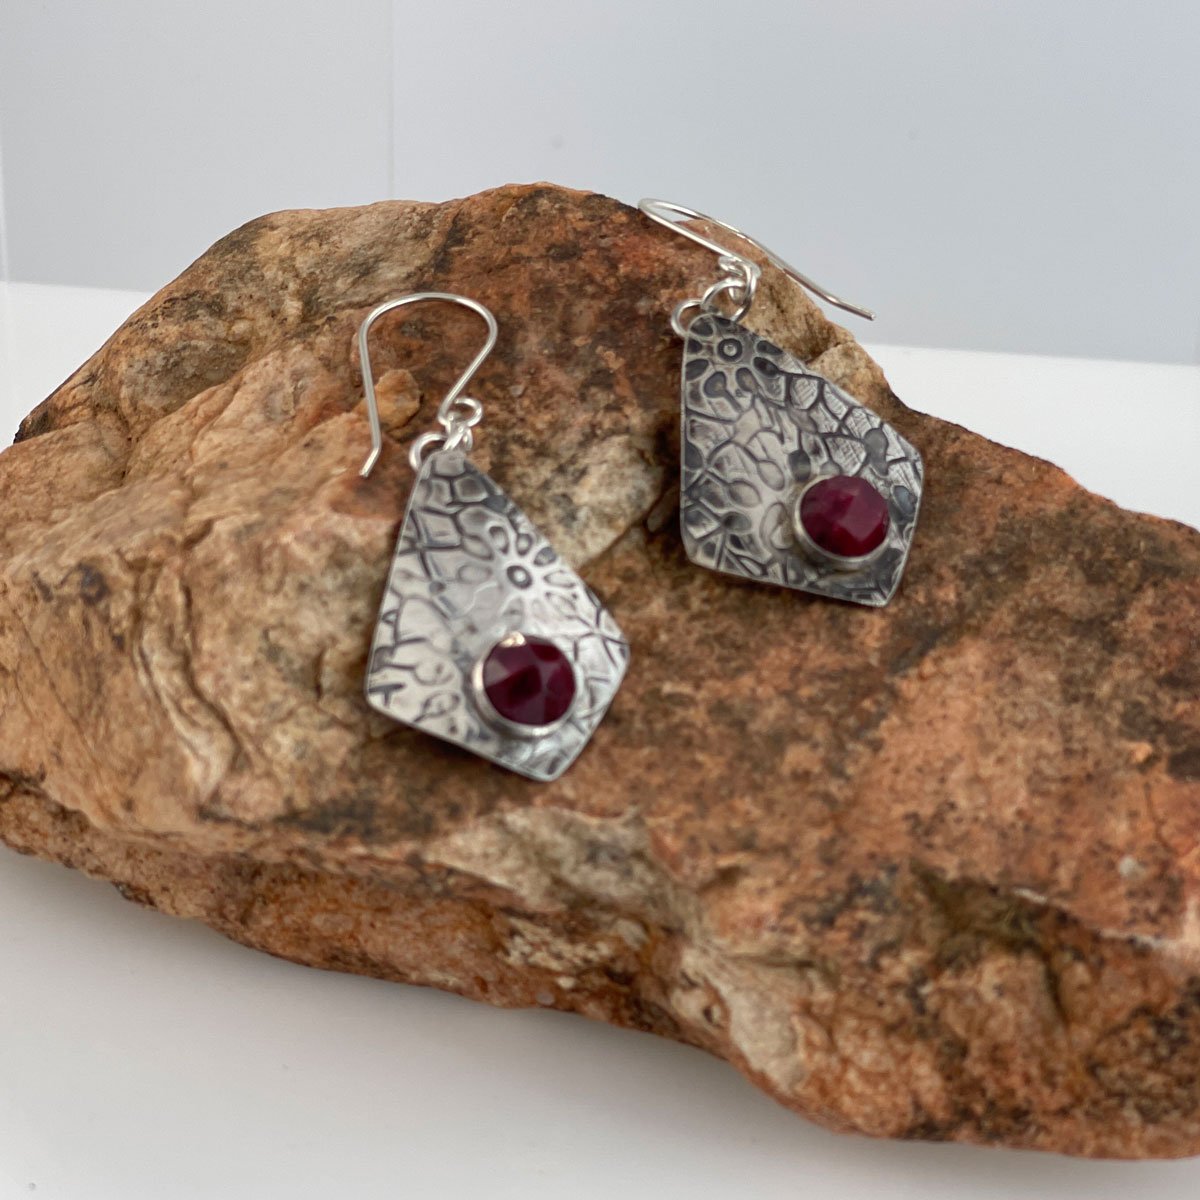 Textured Sterling Silver Kite Shape Earrings with Garnet Stone